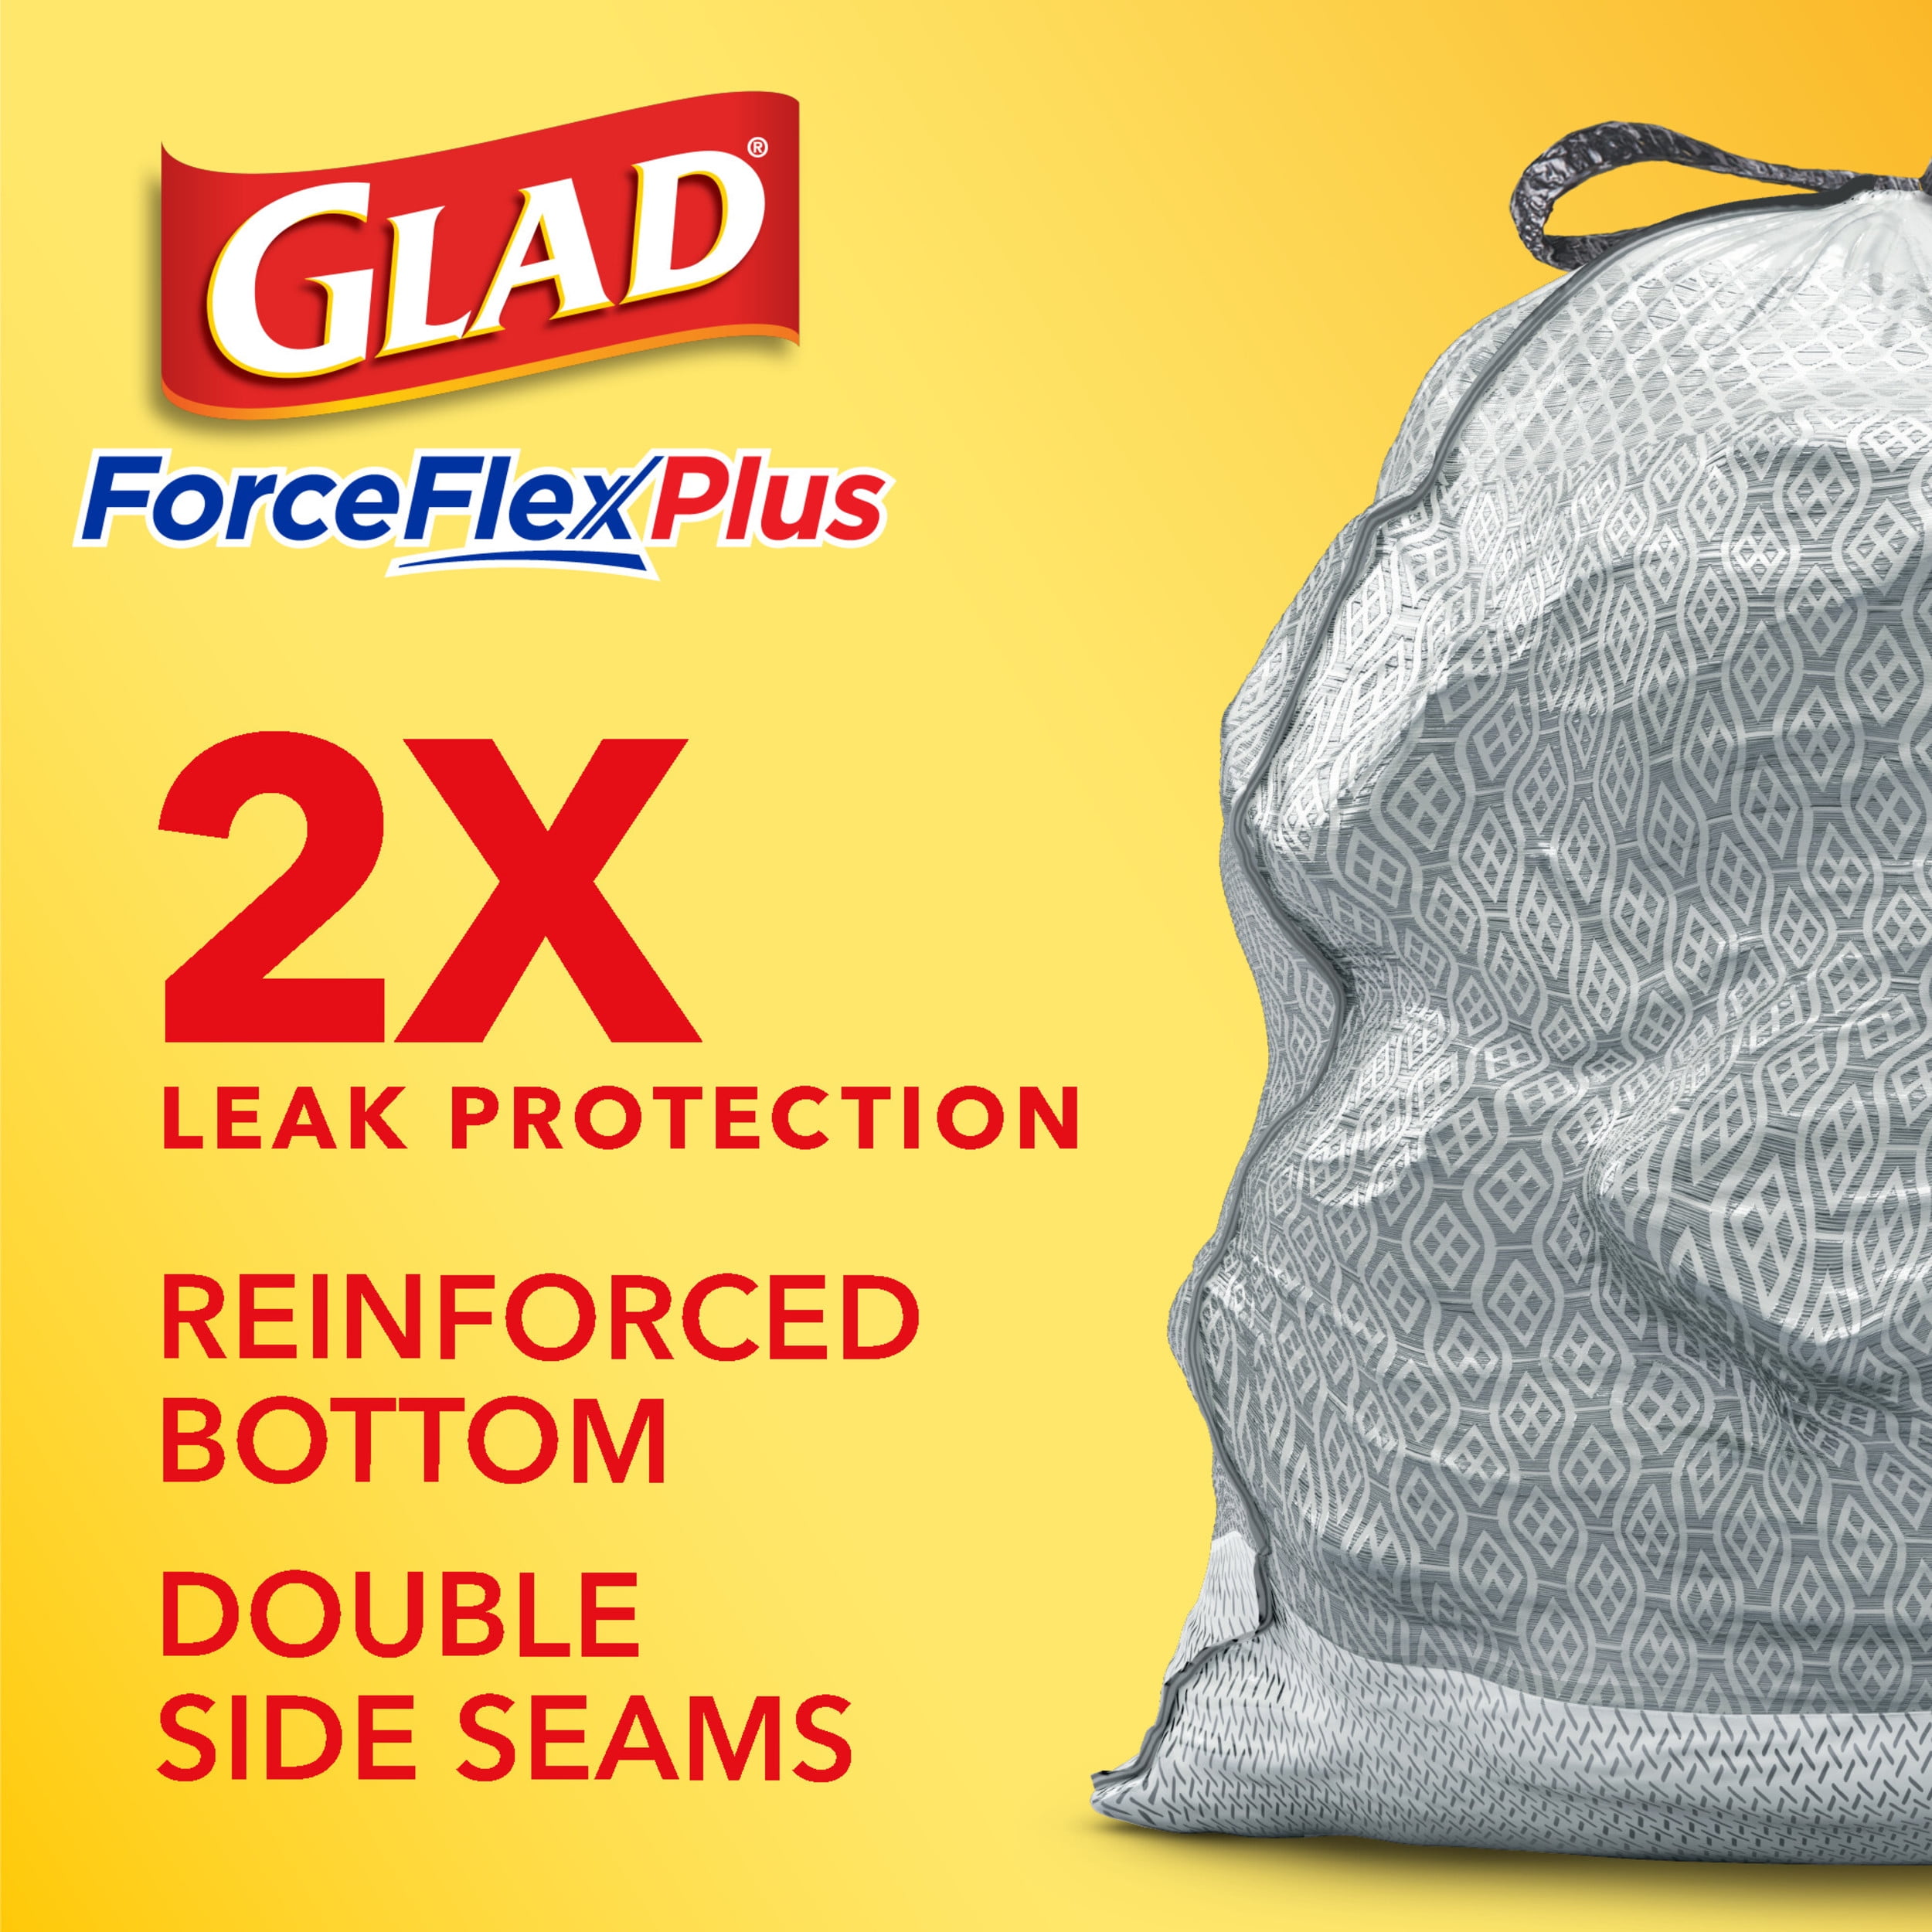 Glad ForceFlexPlus Clorox Mountain Air 13 Gallon Tall Kitchen Trash Bags  (34 ct) Delivery - DoorDash